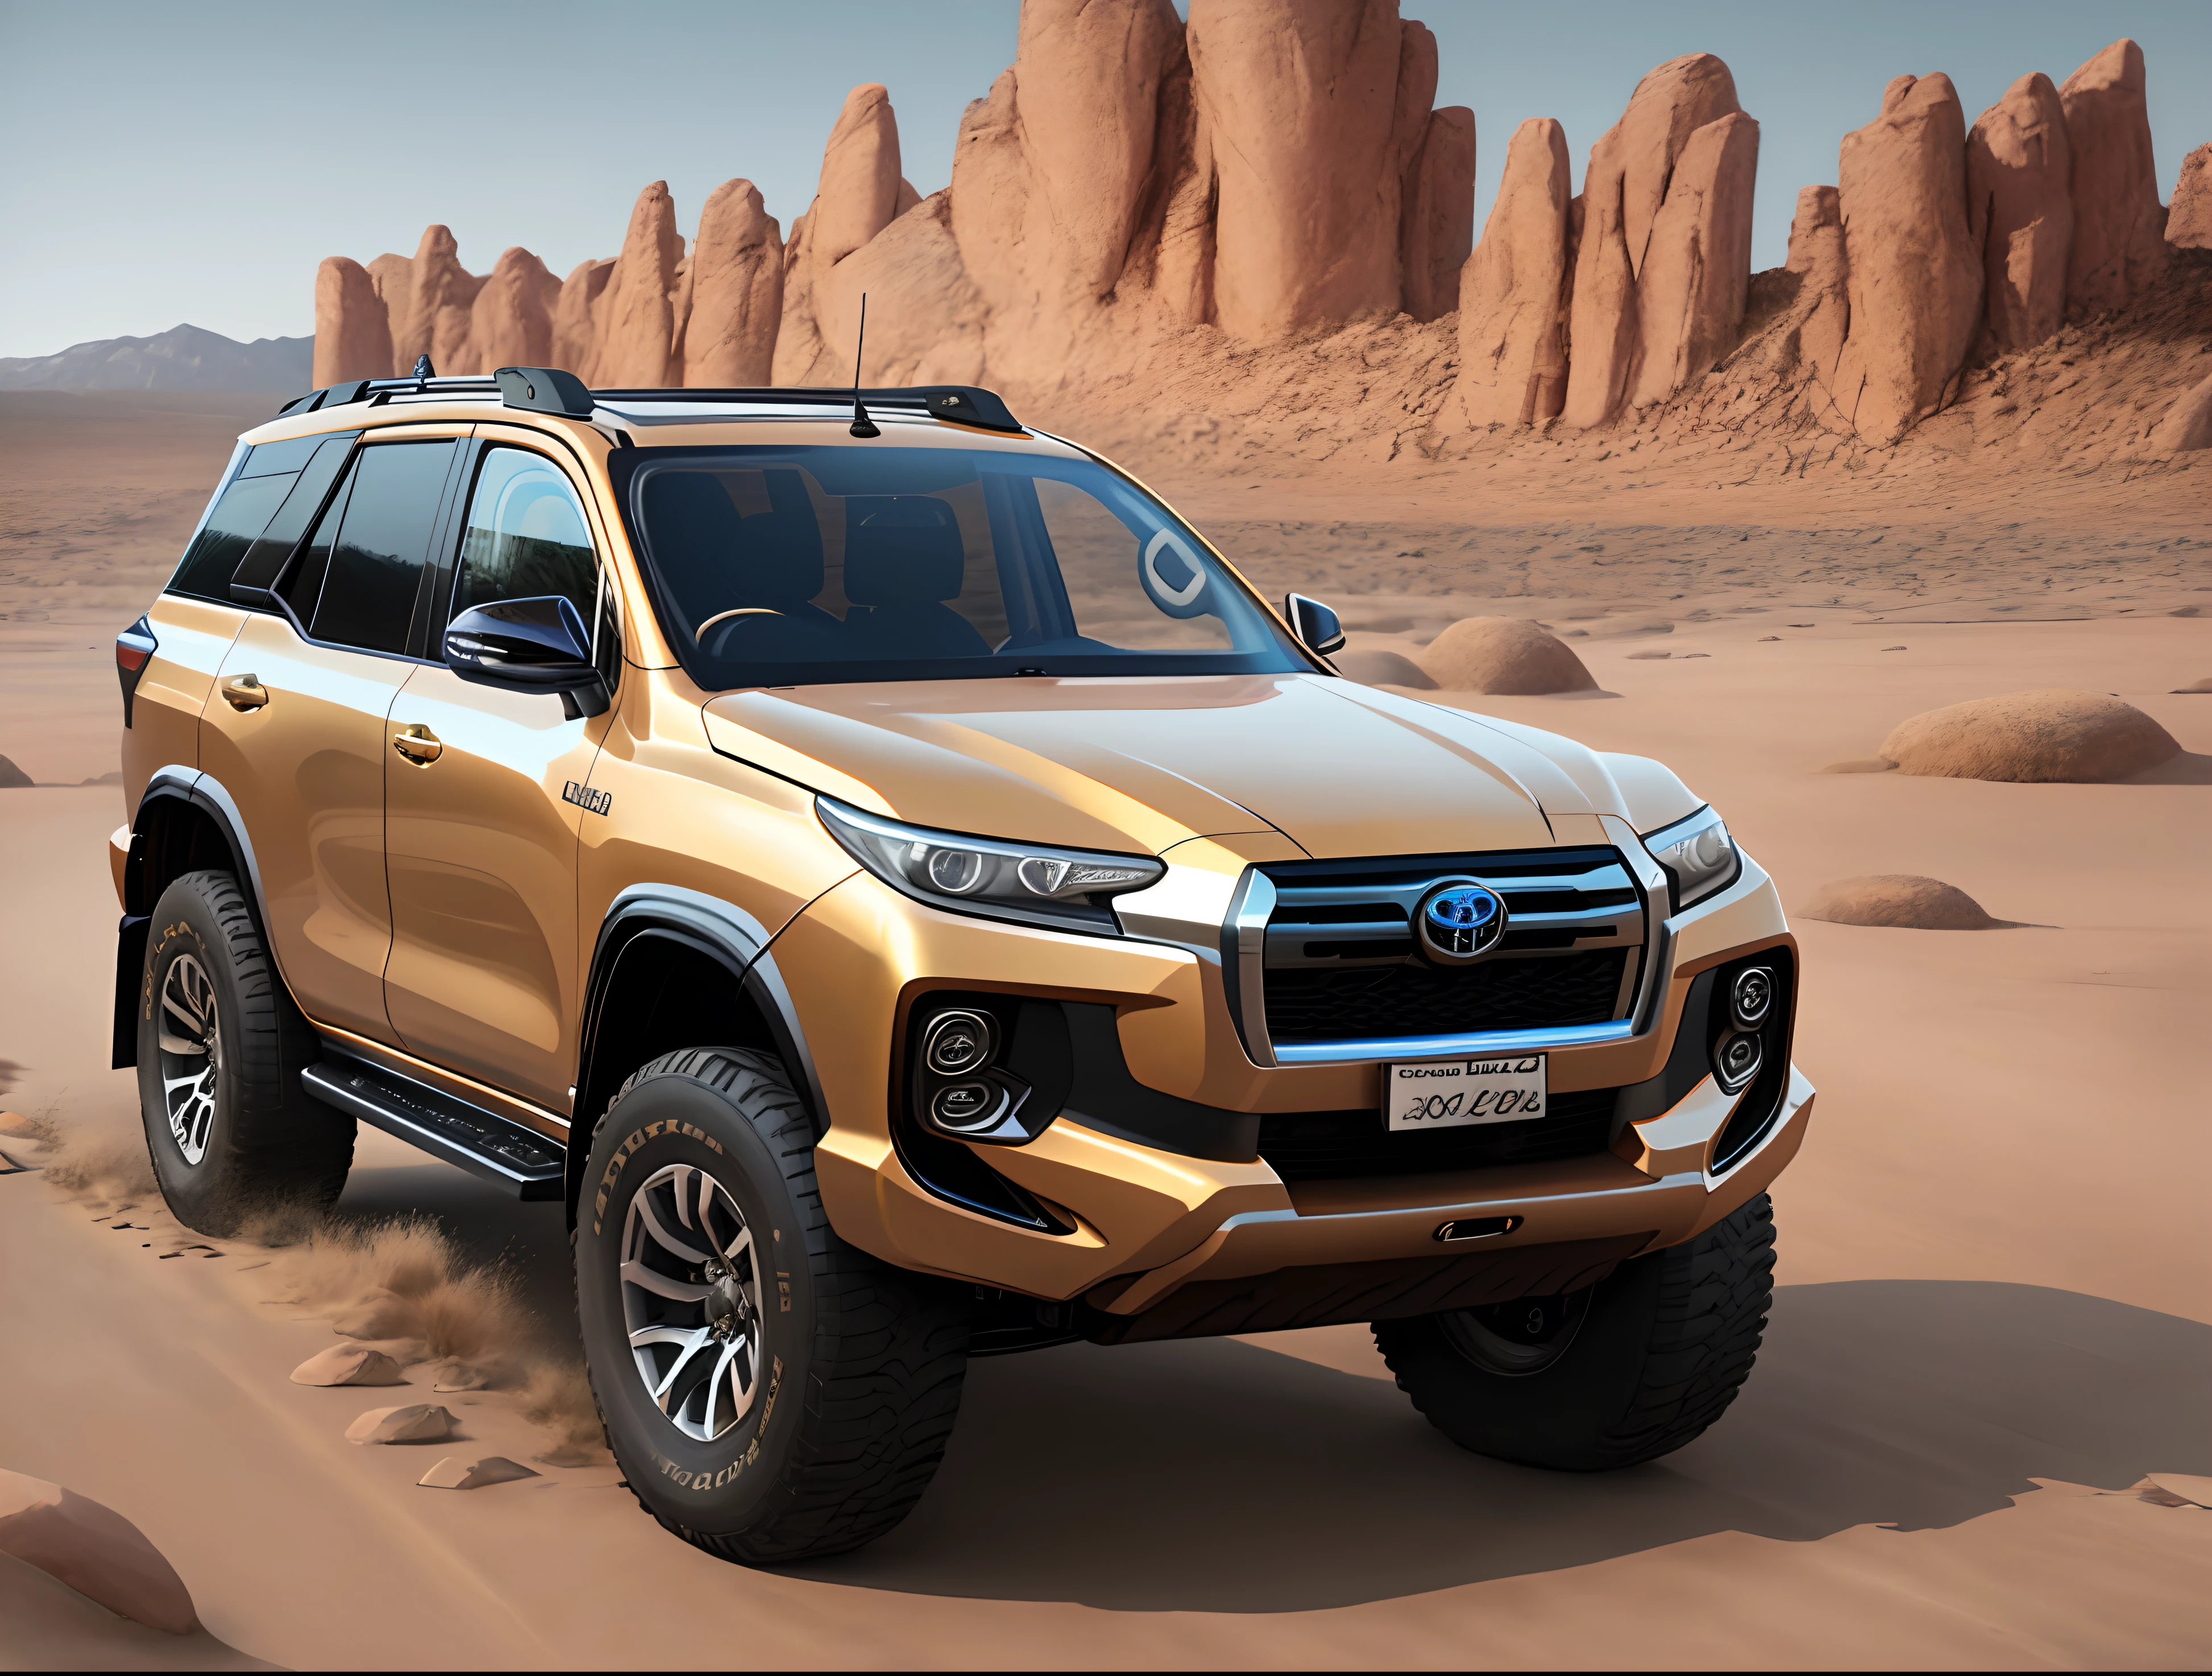 Generate an ultra-realistic 8K image of a fully customized 2023 Toyota Fortuner offroading in a breathtakingly lifelike environment.